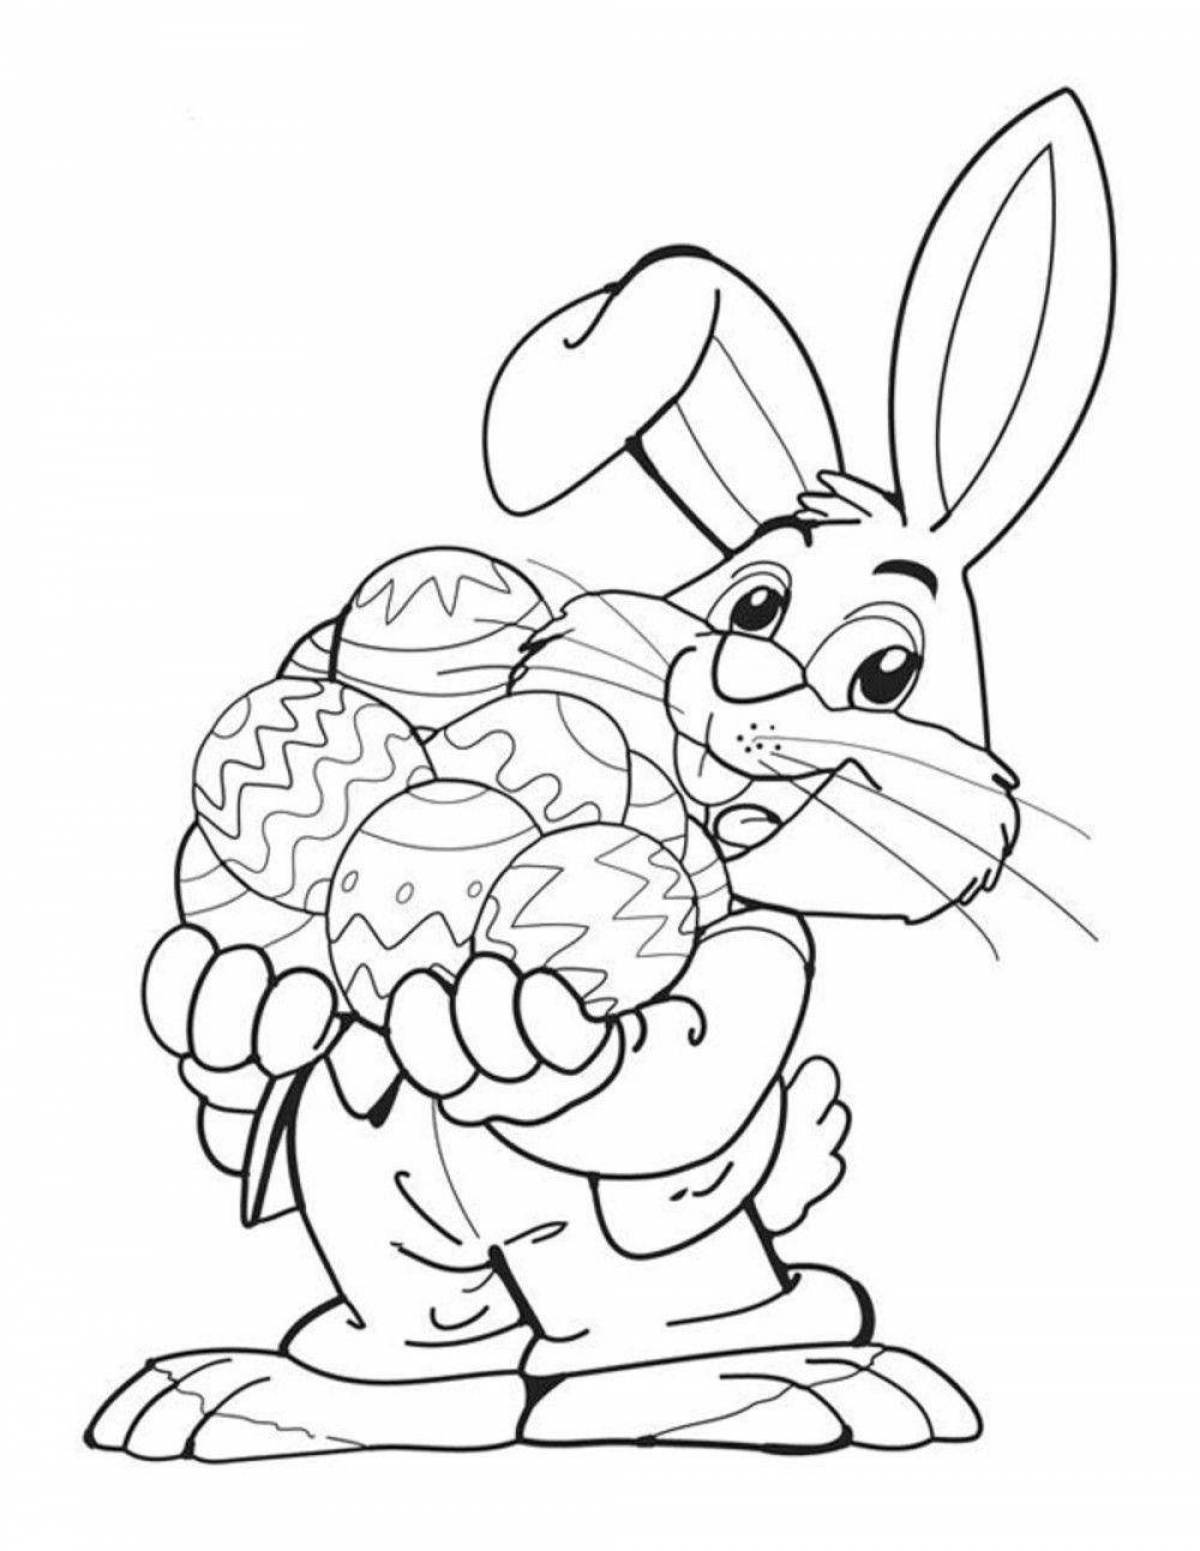 Charming easter bunny coloring book